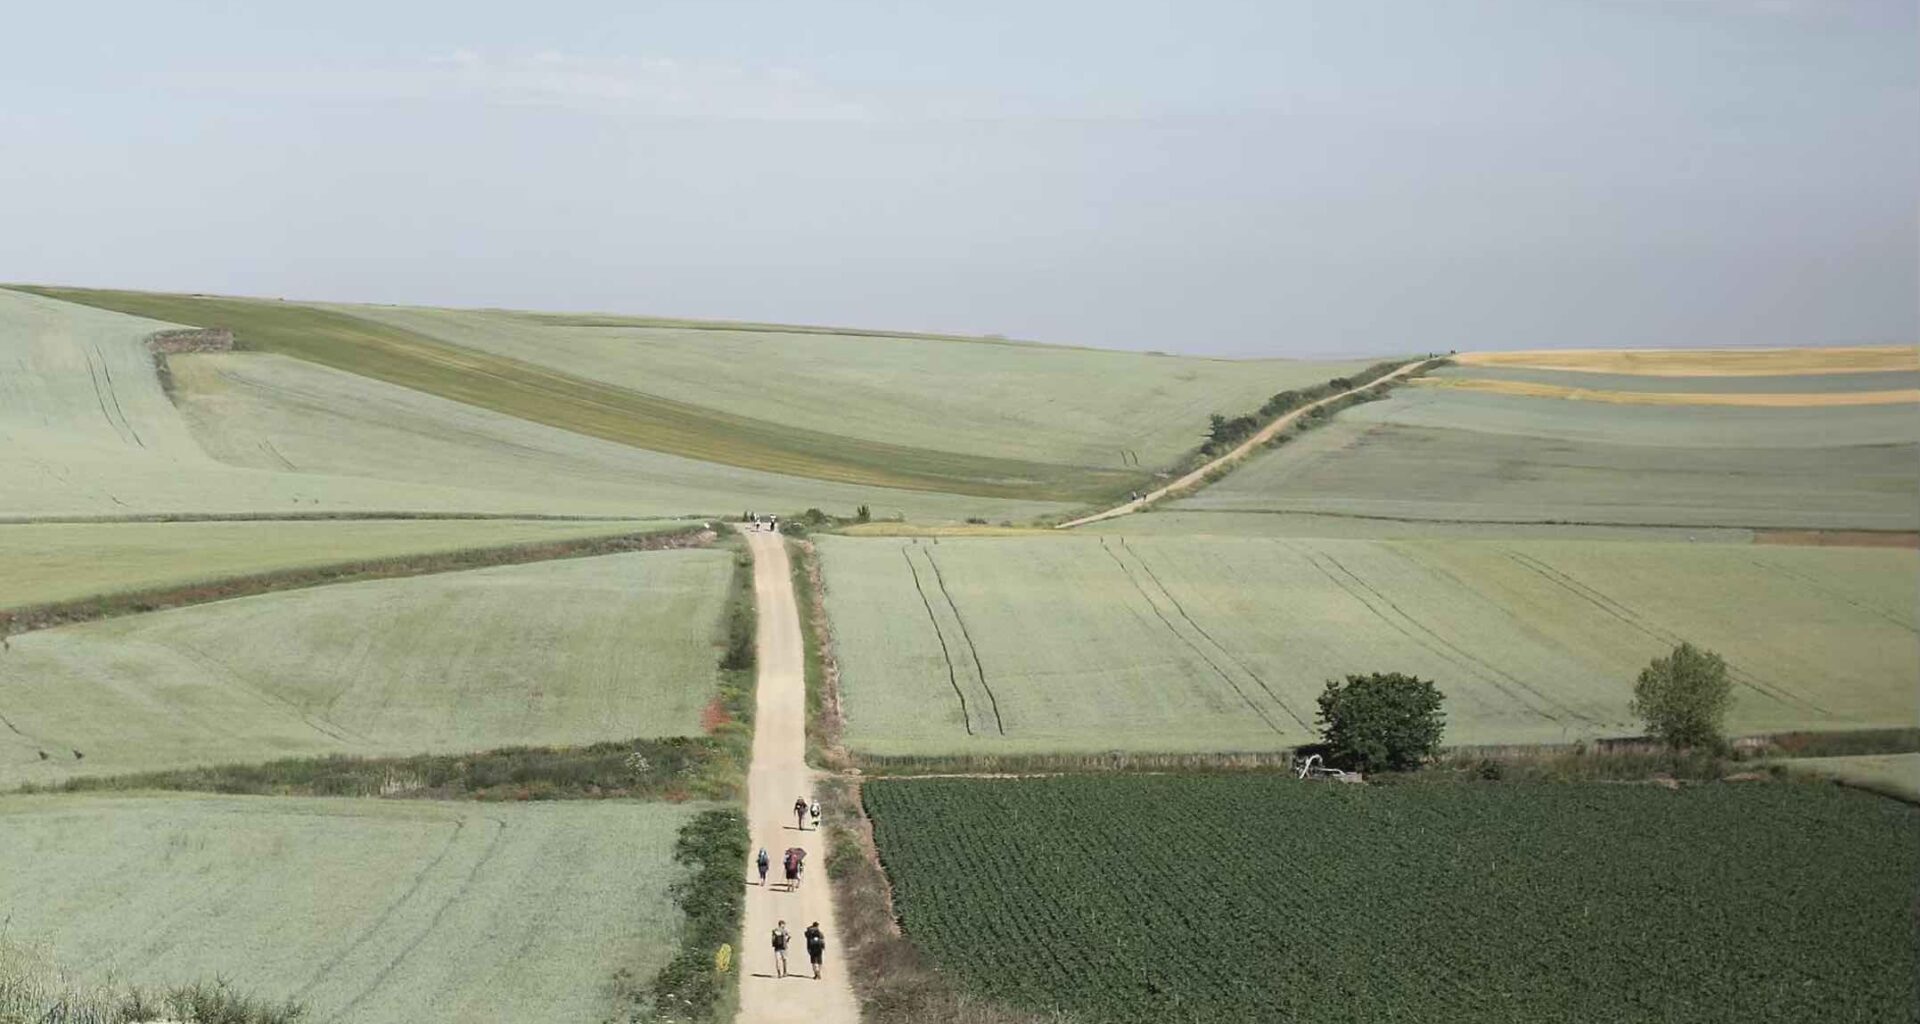 People walking along a track through the country on the Camino de Santiago pilgrimage